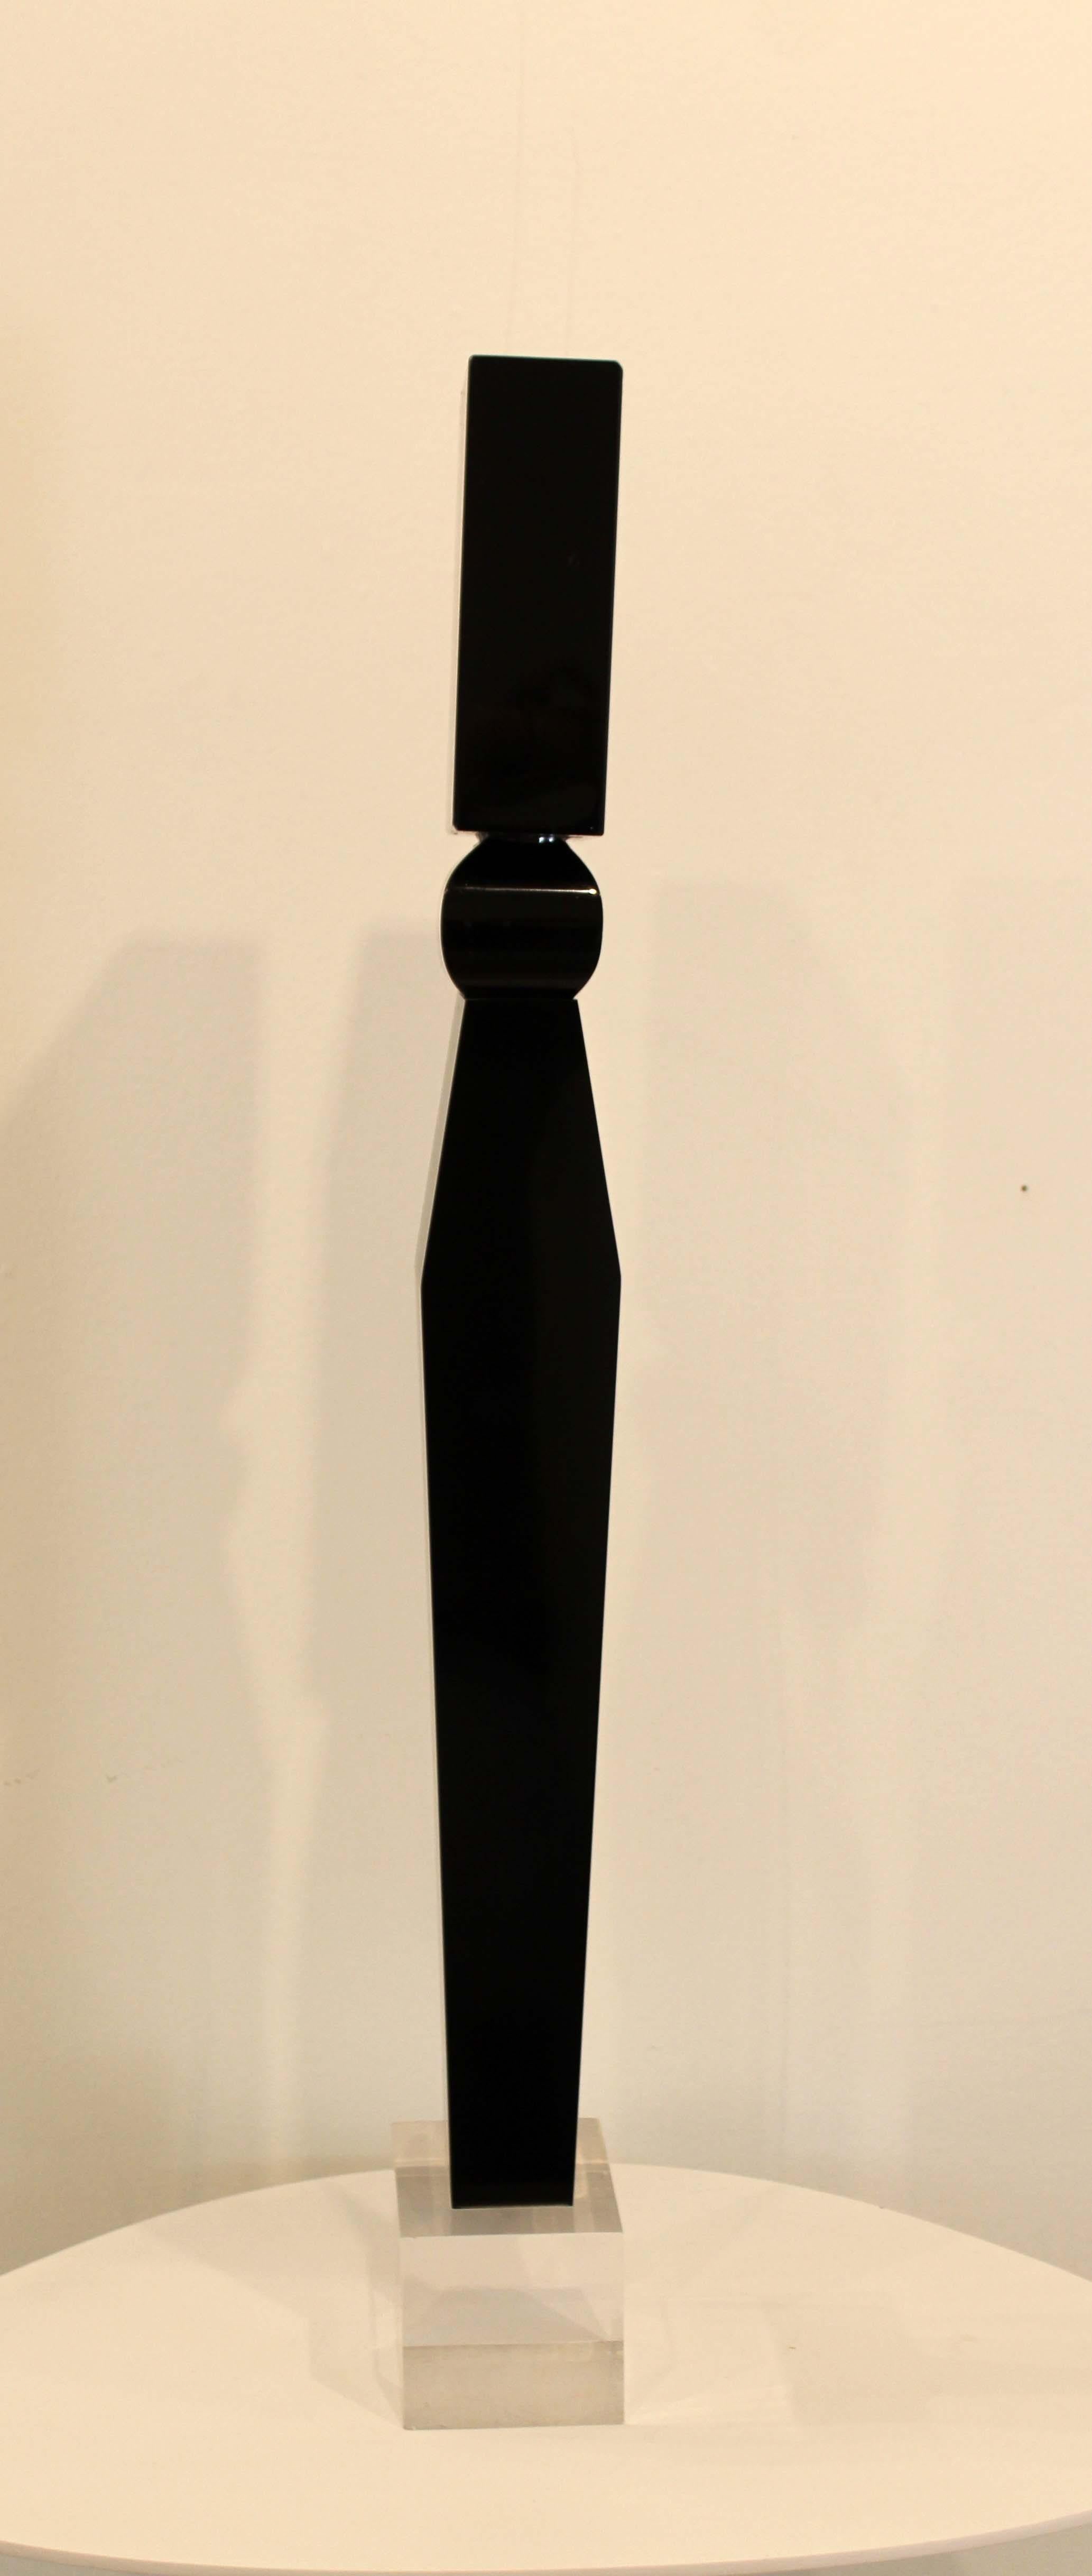 A stunning, monolithic, sleek sculpture depicting a modern black pillar by Detroit sculptor James Nani. This sculpture would be lovely in a modern or Art Deco inspired space. Circa 1970s. Dimensions: 26.5 H x 3 D x 4.5 W. In excellent vintage